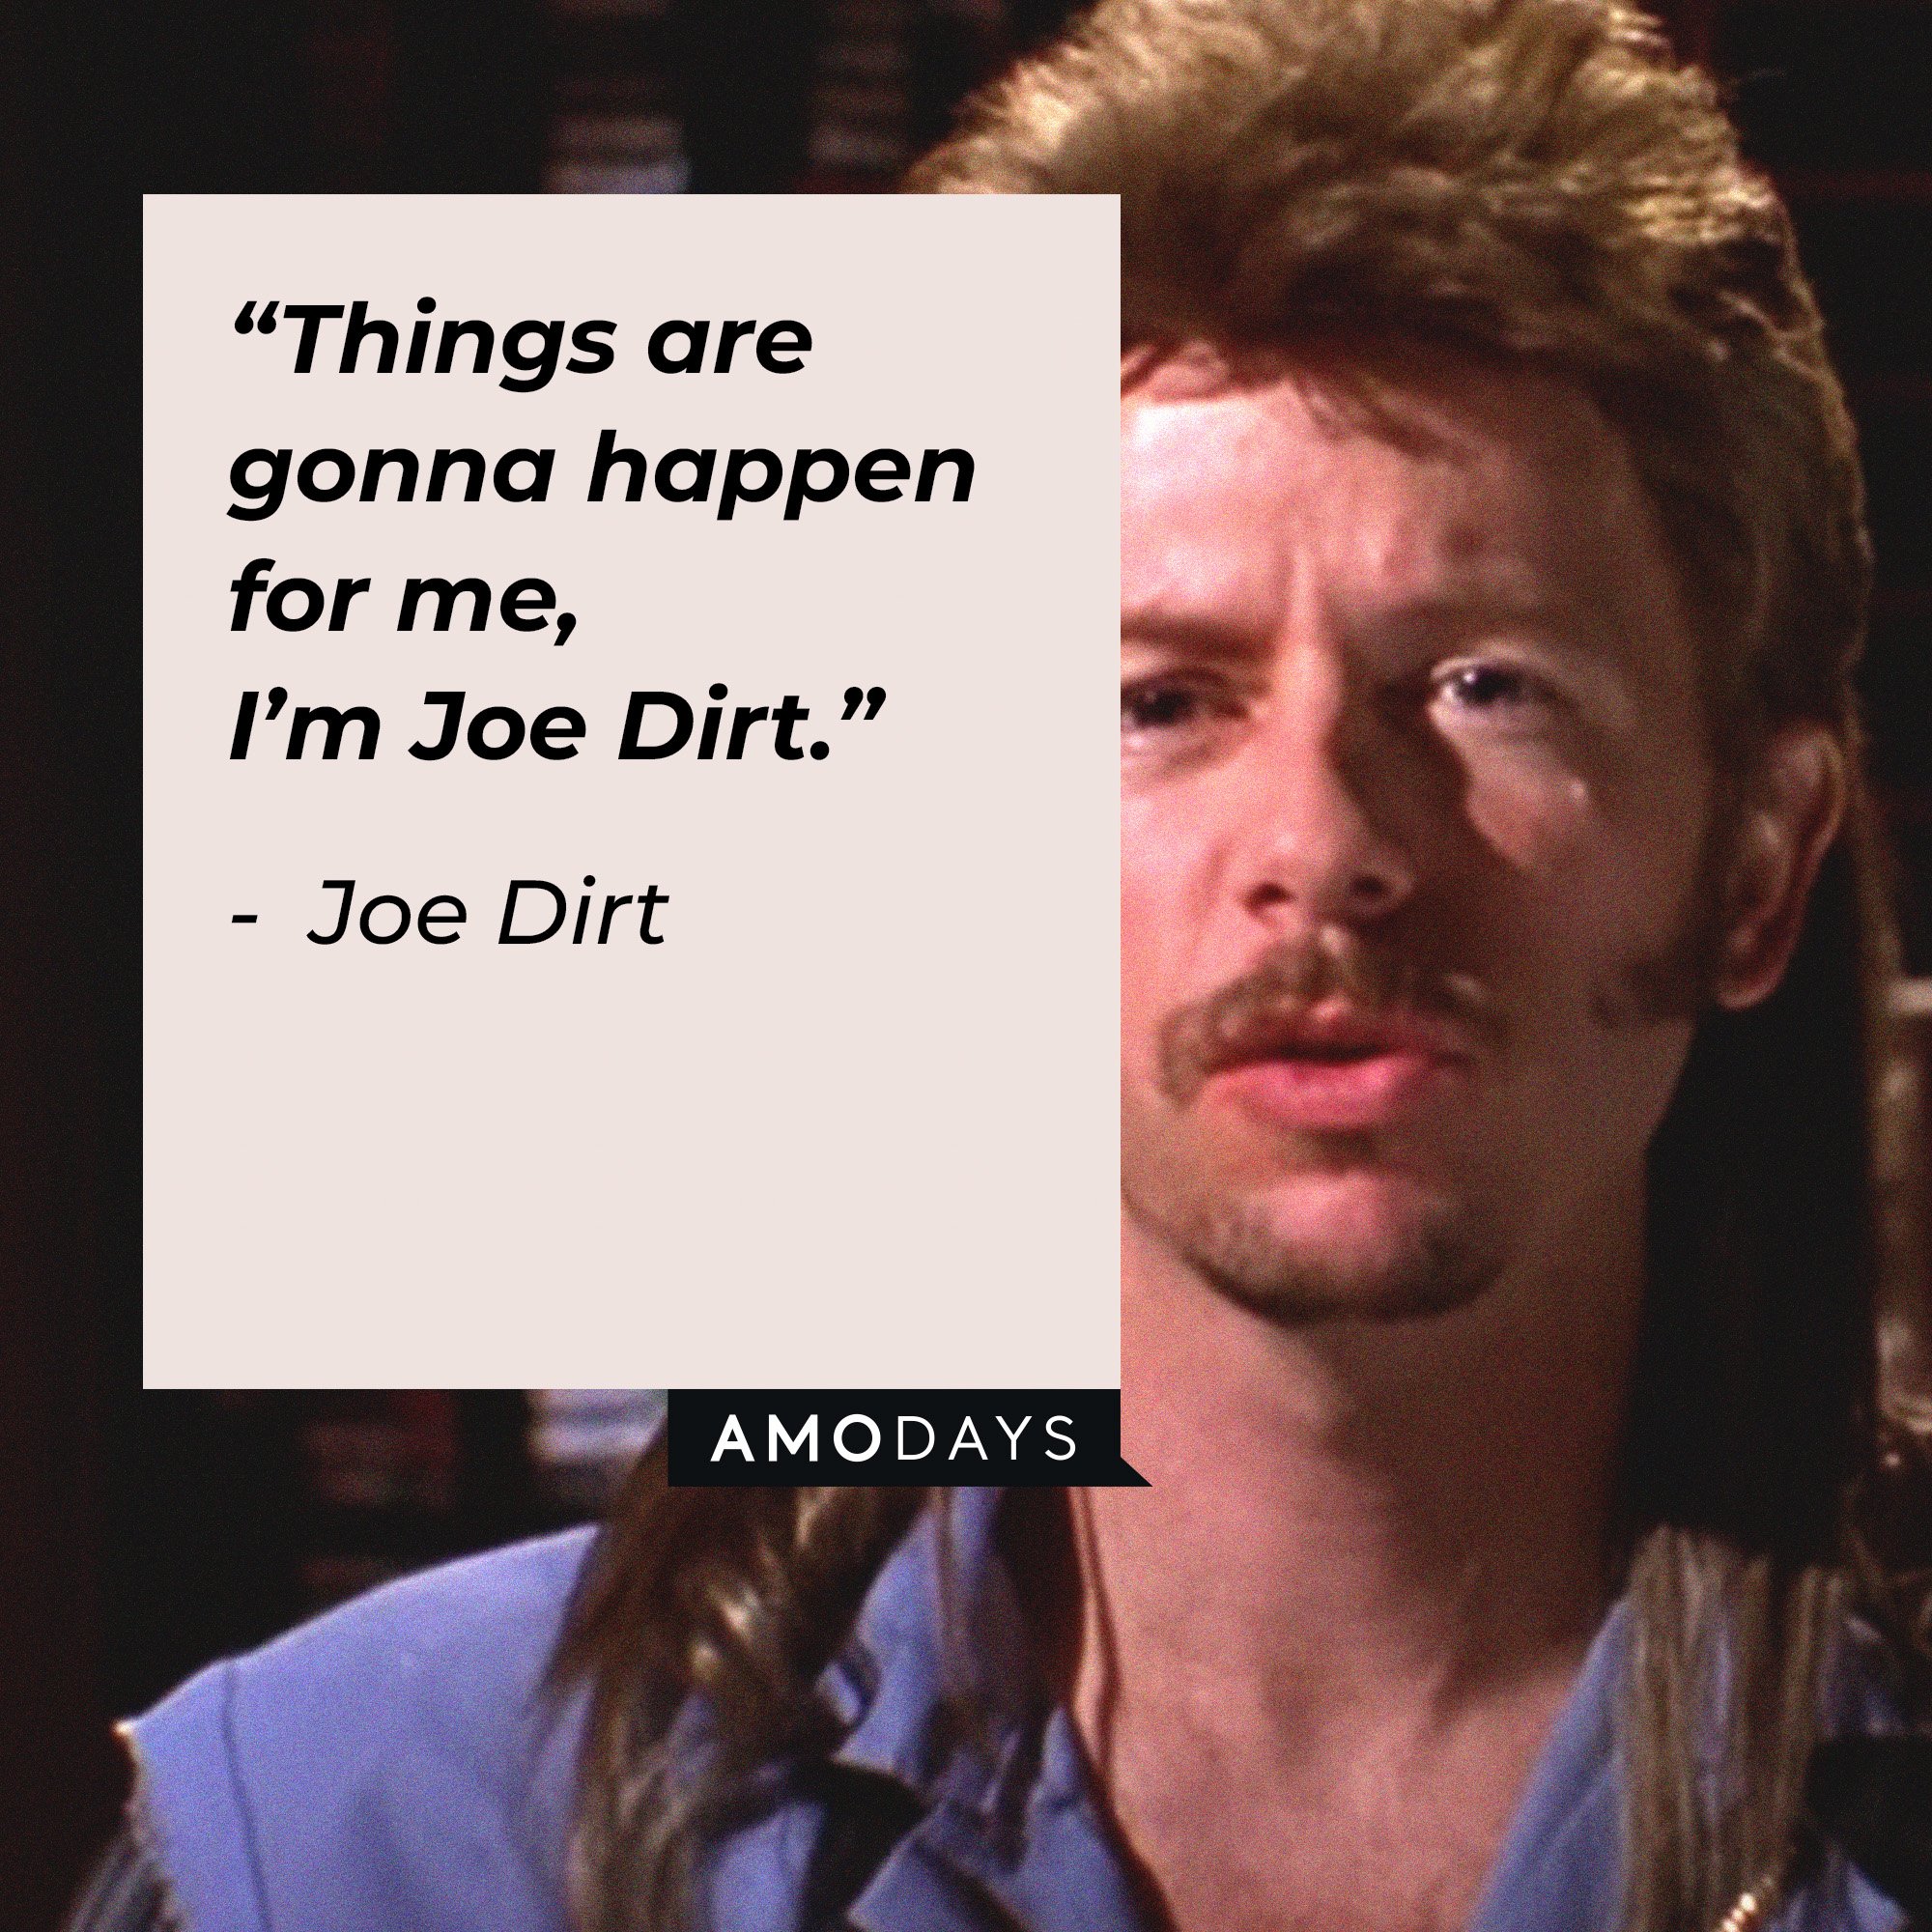 Joe Dirt's quote: “Things are gonna happen for me, I’m Joe Dirt.” | Image: AmoDays